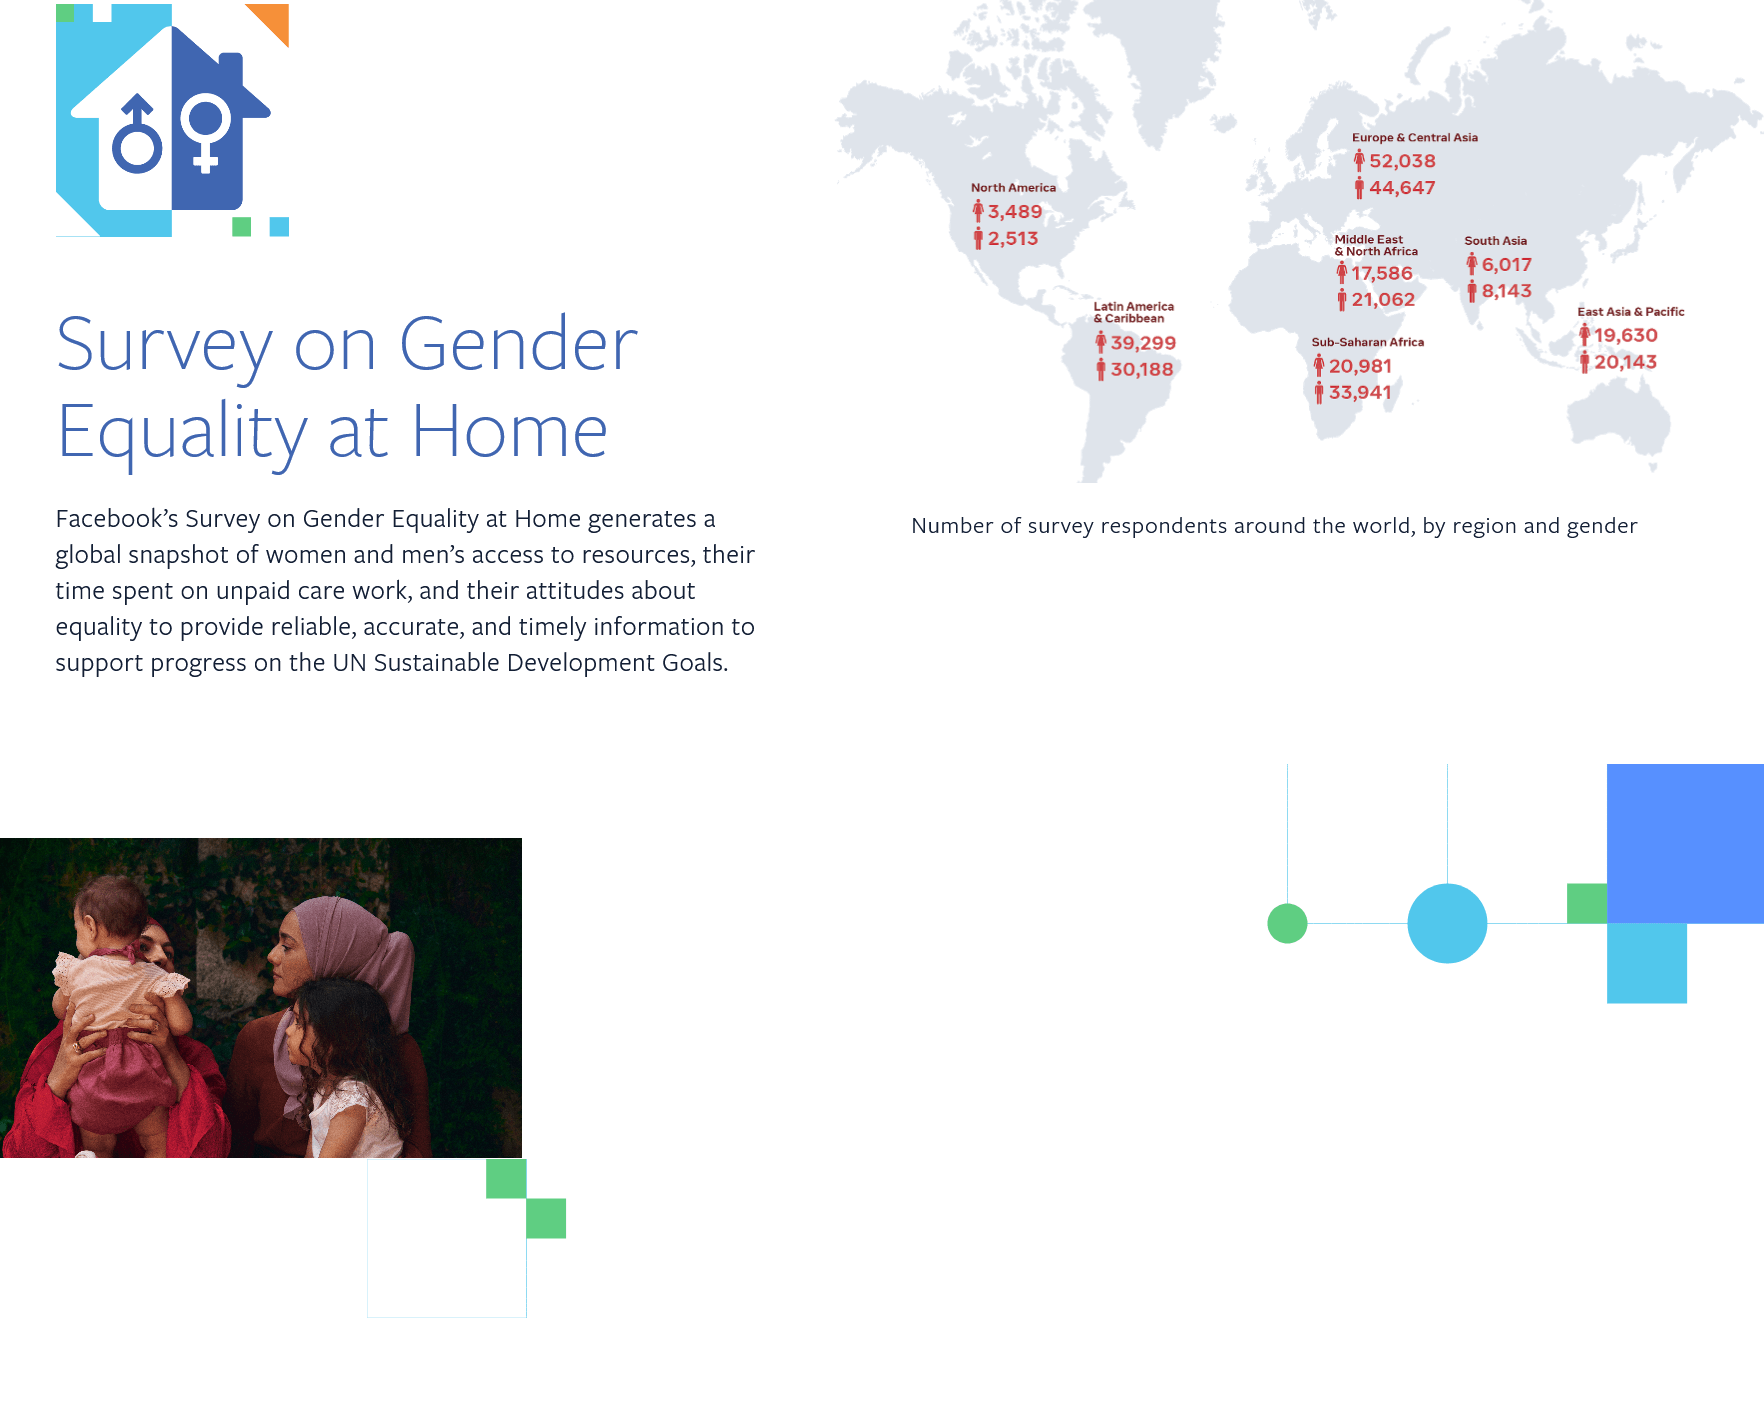 Survey on Gender Equality at Home Report